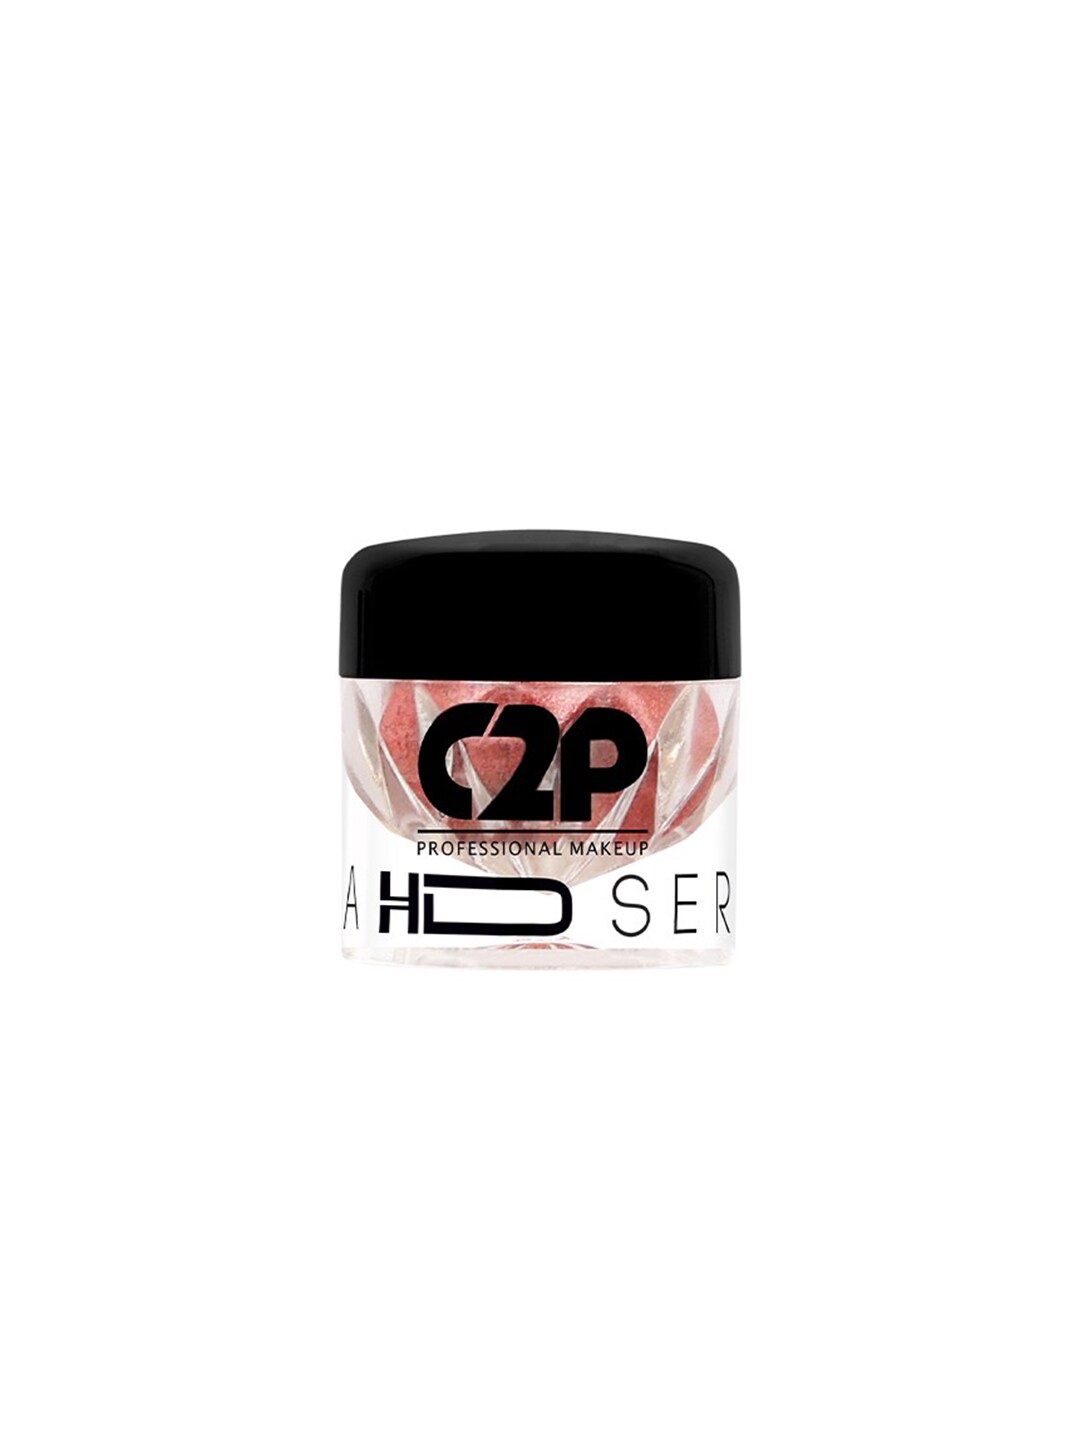 C2P PROFESSIONAL MAKEUP HD Loose Precious Pigments 2 g - Cherry 45 Price in India